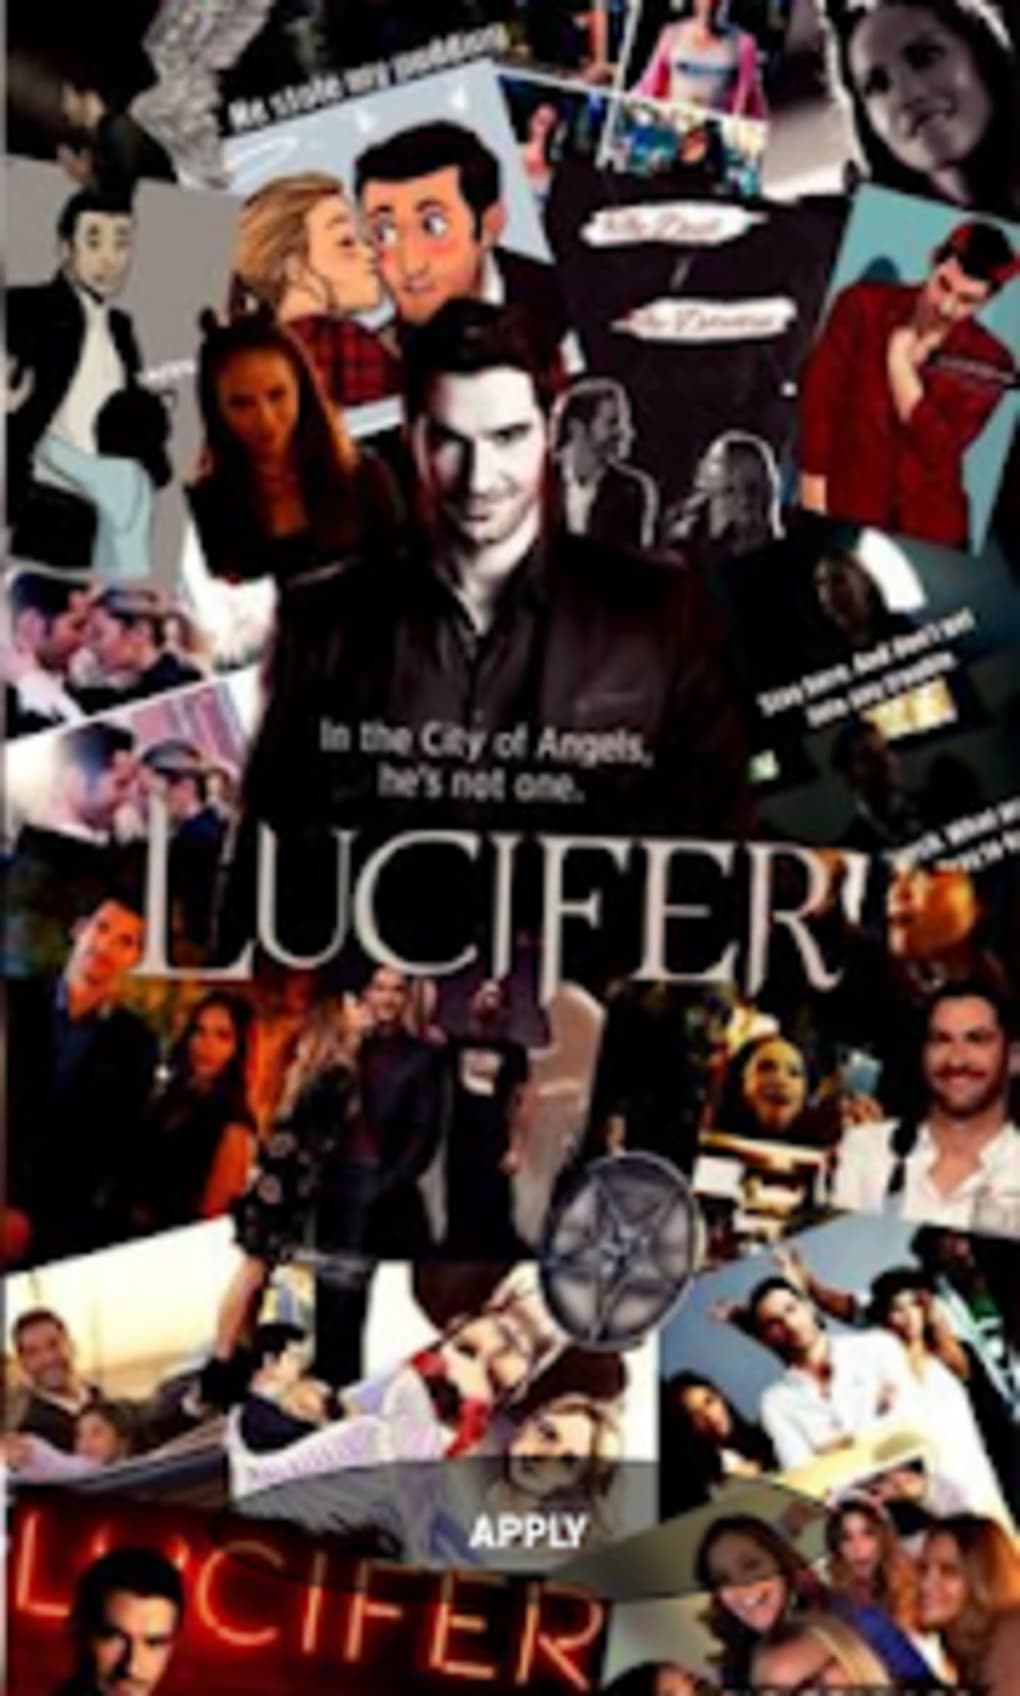 8 Real Picture Of Lucifer Photos, Pictures And Background Images For Free  Download - Pngtree